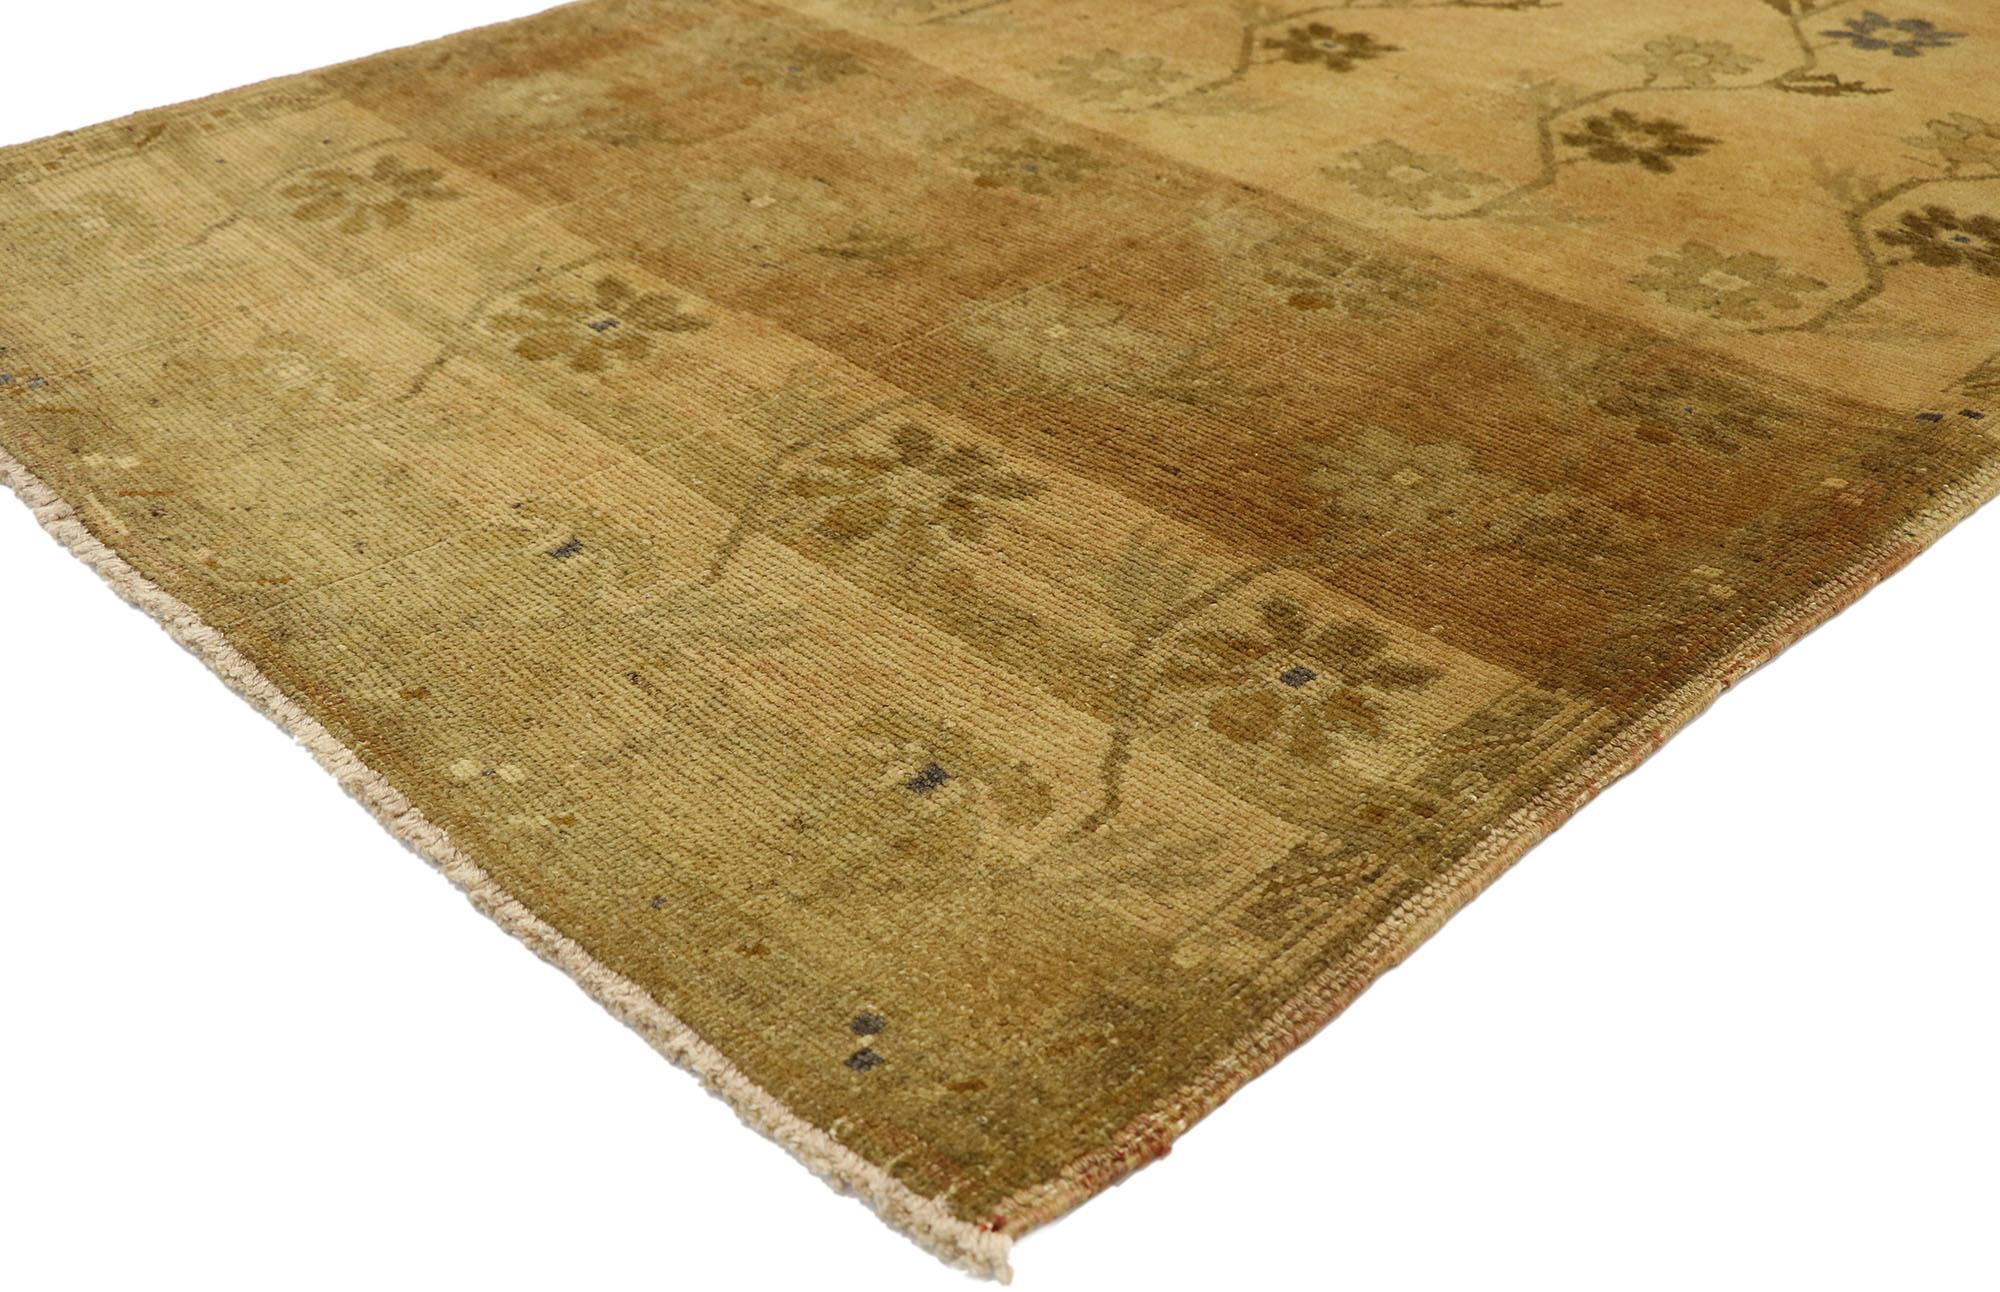 50128 Vintage Turkish Oushak Rug, 03'05 X 06'00. Antique-washed Turkish Oushak rugs, originating from the Oushak region in western Turkey, undergo a meticulous washing process to soften colors and introduce subtle variations mimicking natural aging.